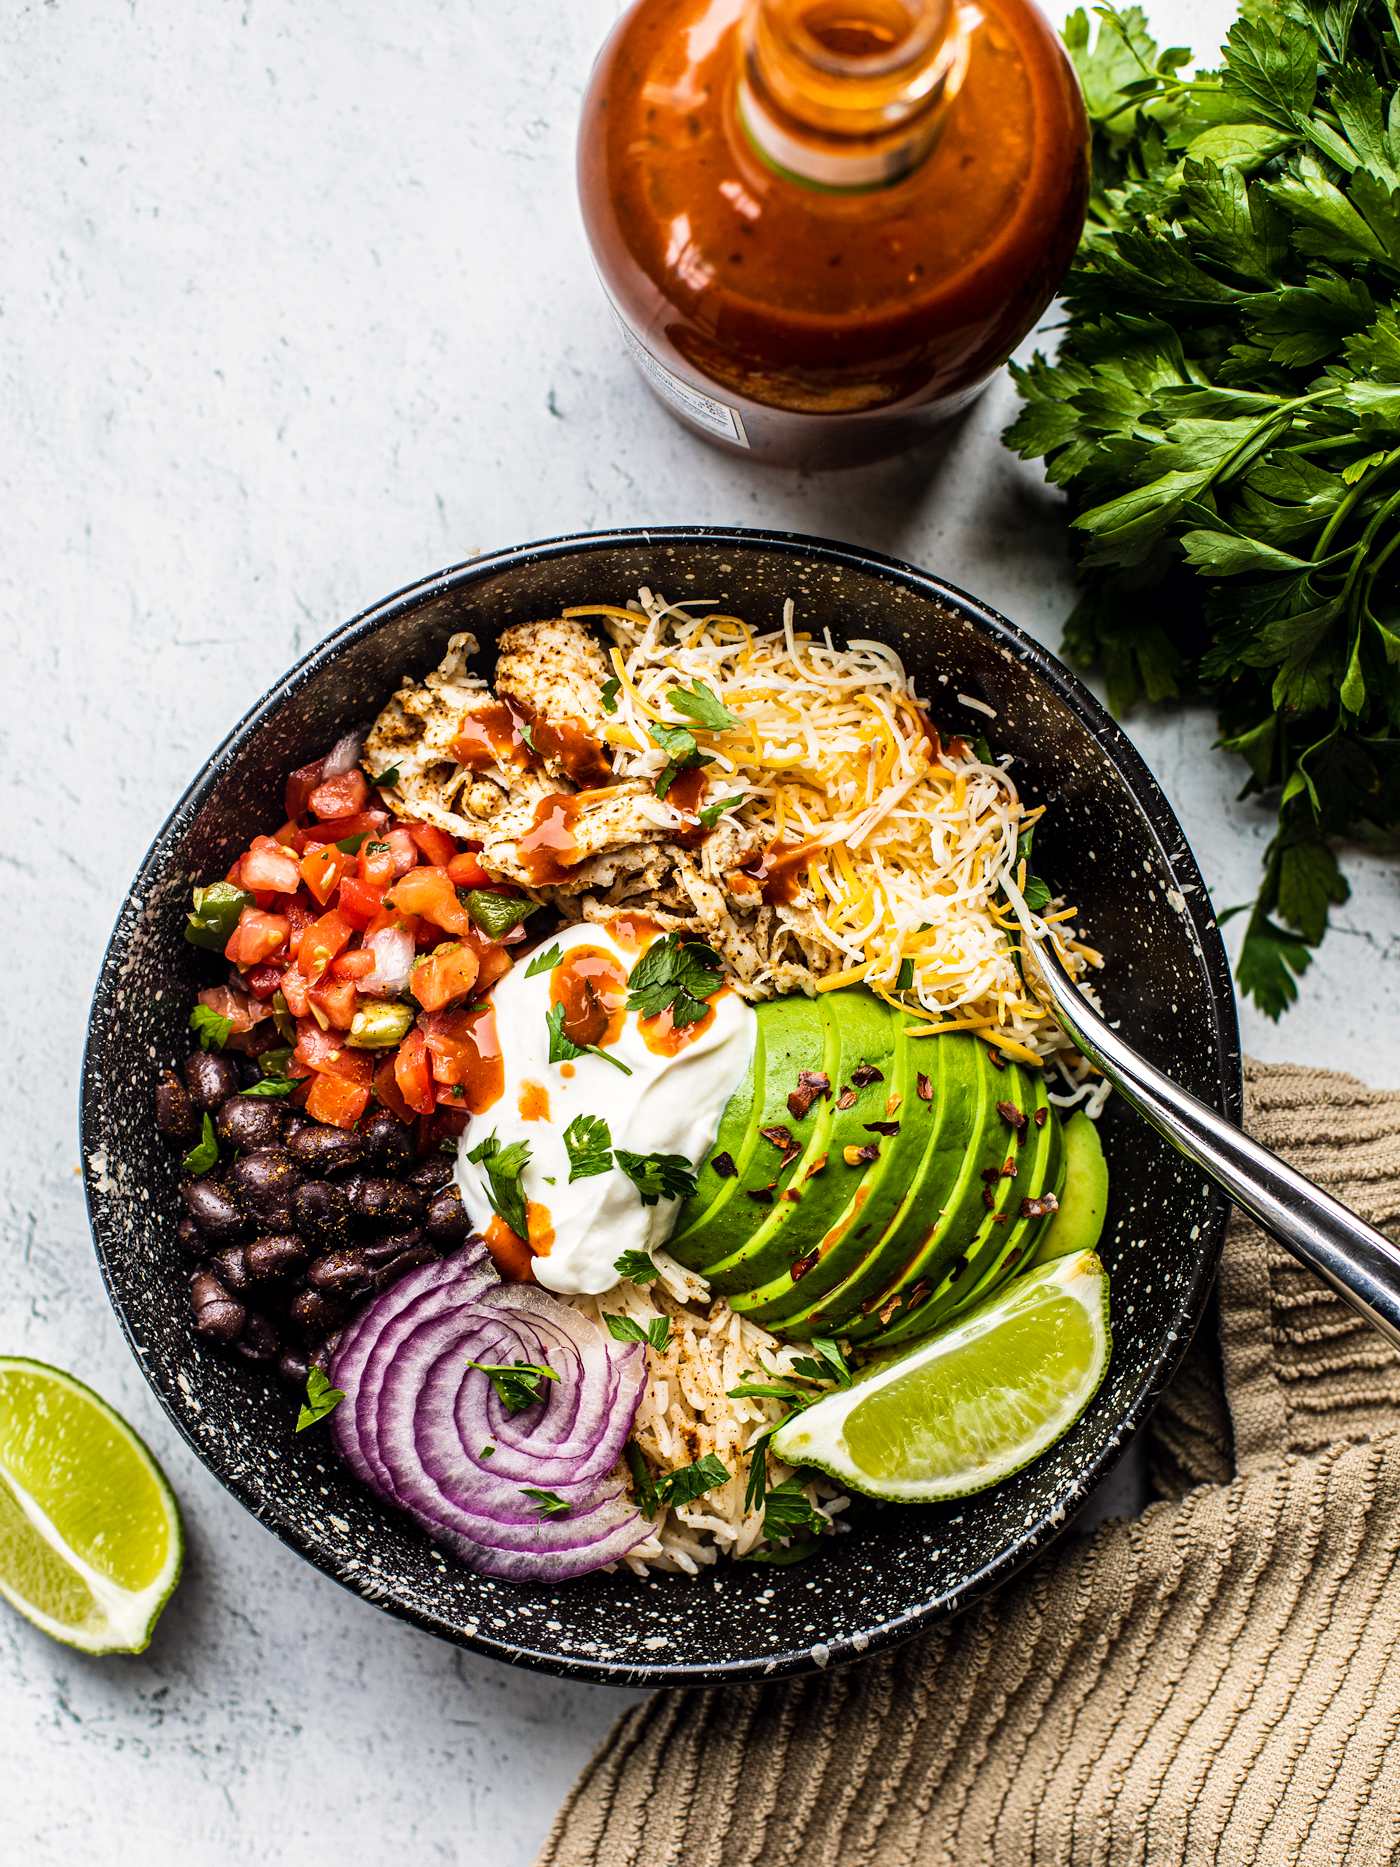 Black bowl filled with rice, pico de gallo, black beans, onions, avocado, and shredded chicken.